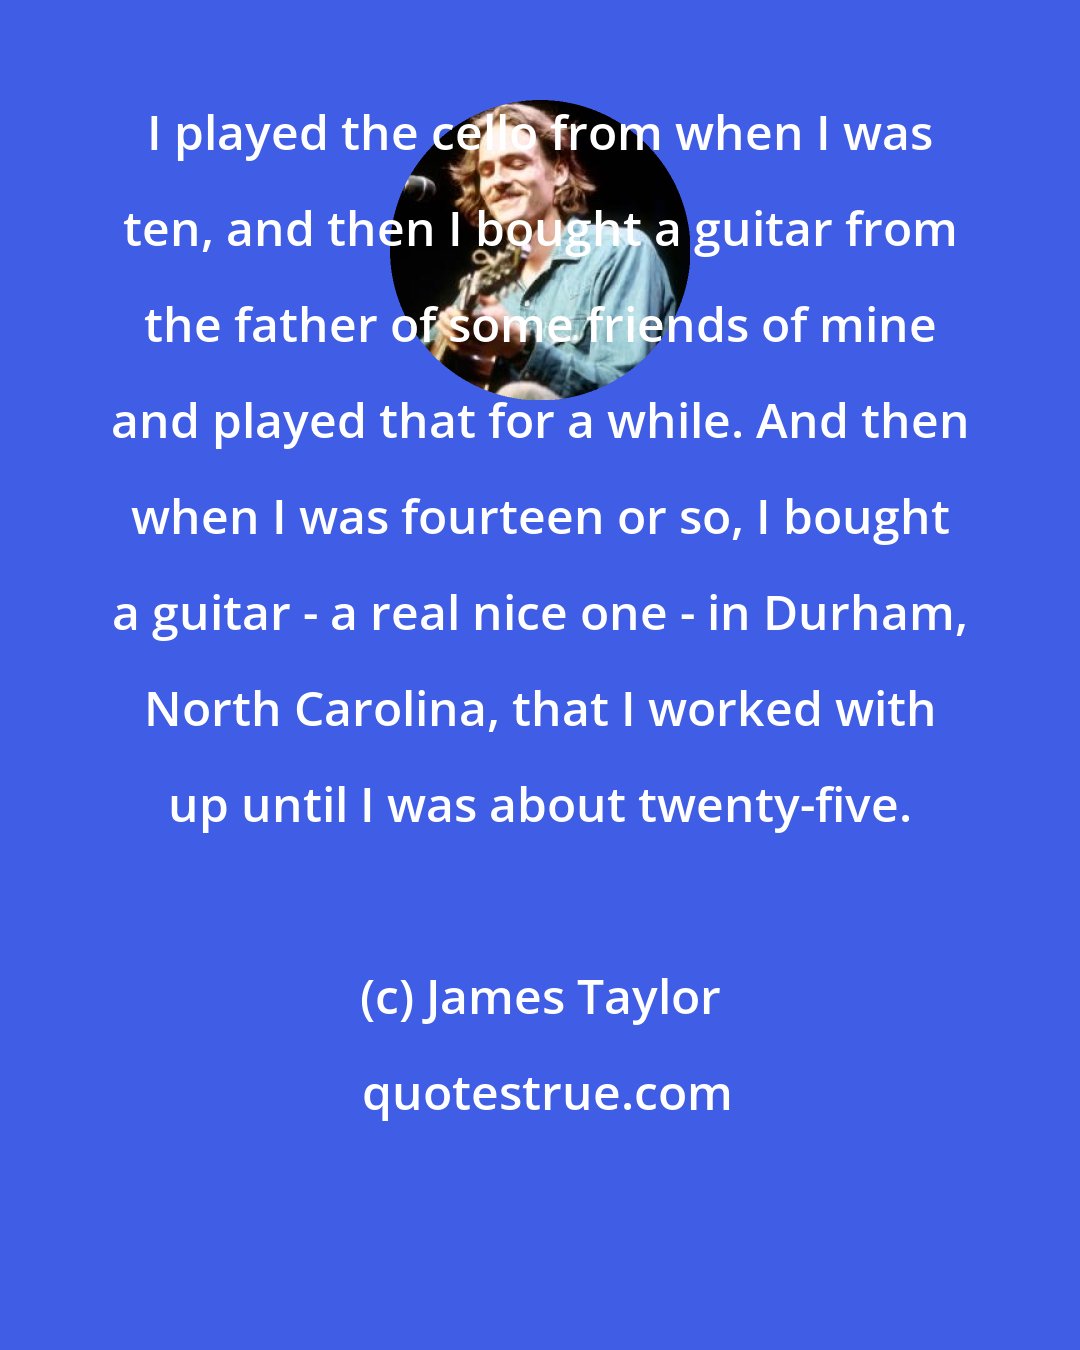 James Taylor: I played the cello from when I was ten, and then I bought a guitar from the father of some friends of mine and played that for a while. And then when I was fourteen or so, I bought a guitar - a real nice one - in Durham, North Carolina, that I worked with up until I was about twenty-five.